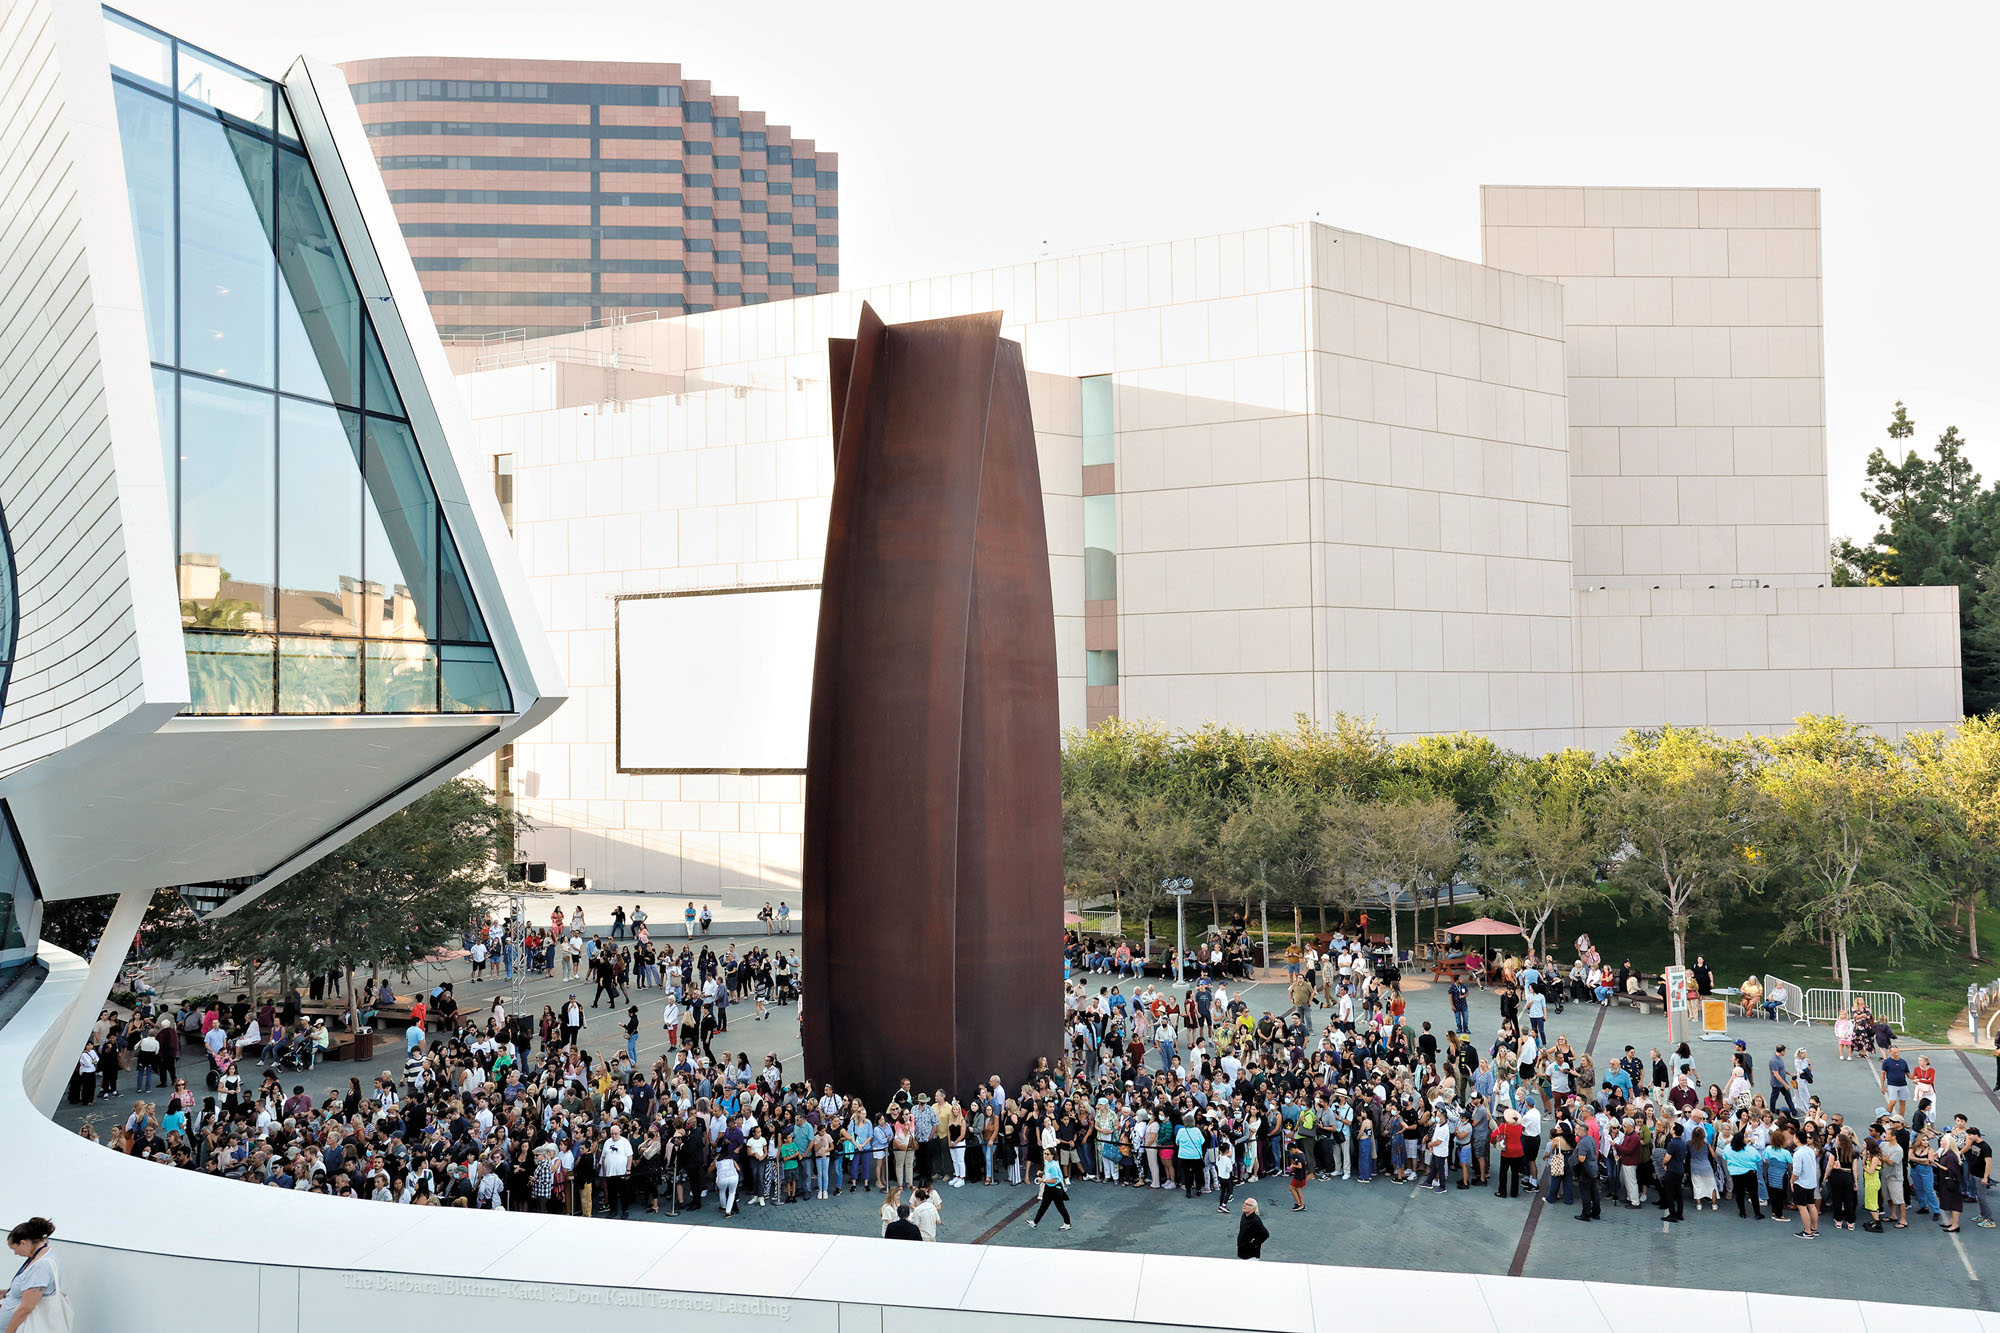 Exterior image of a courtyard with visitors surrounding a richard serra sculpture. 